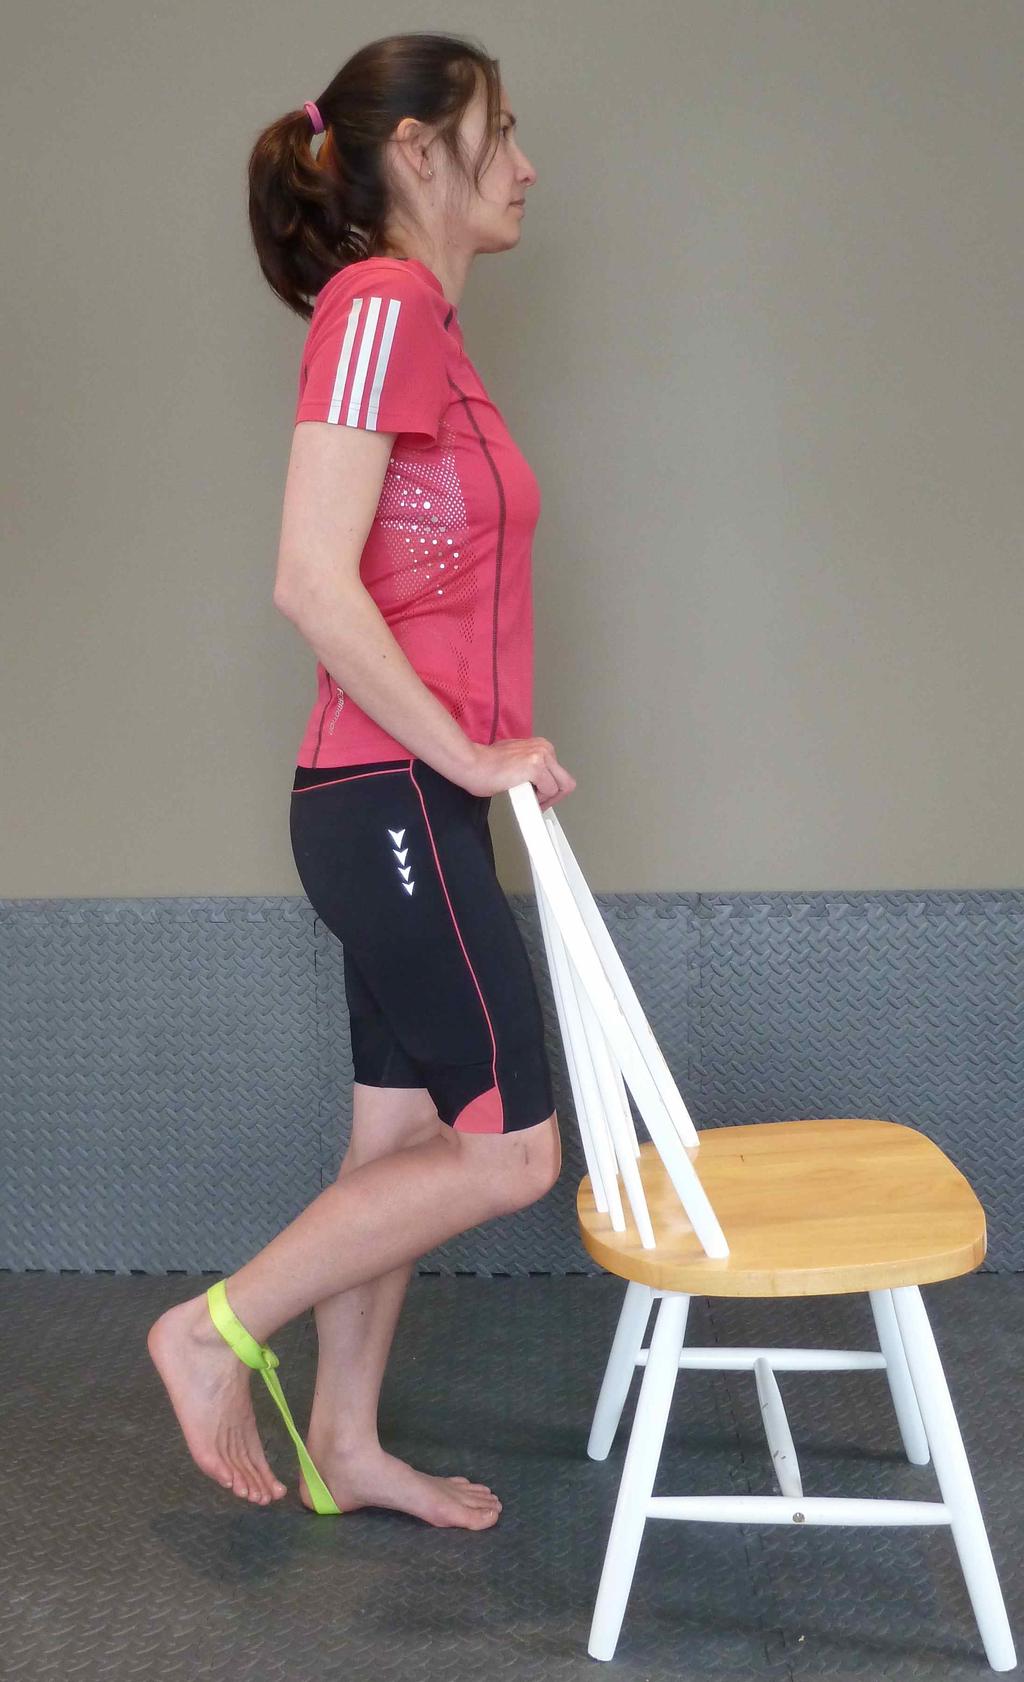 Have a resistance band secured at ground level and looped around your ankle.